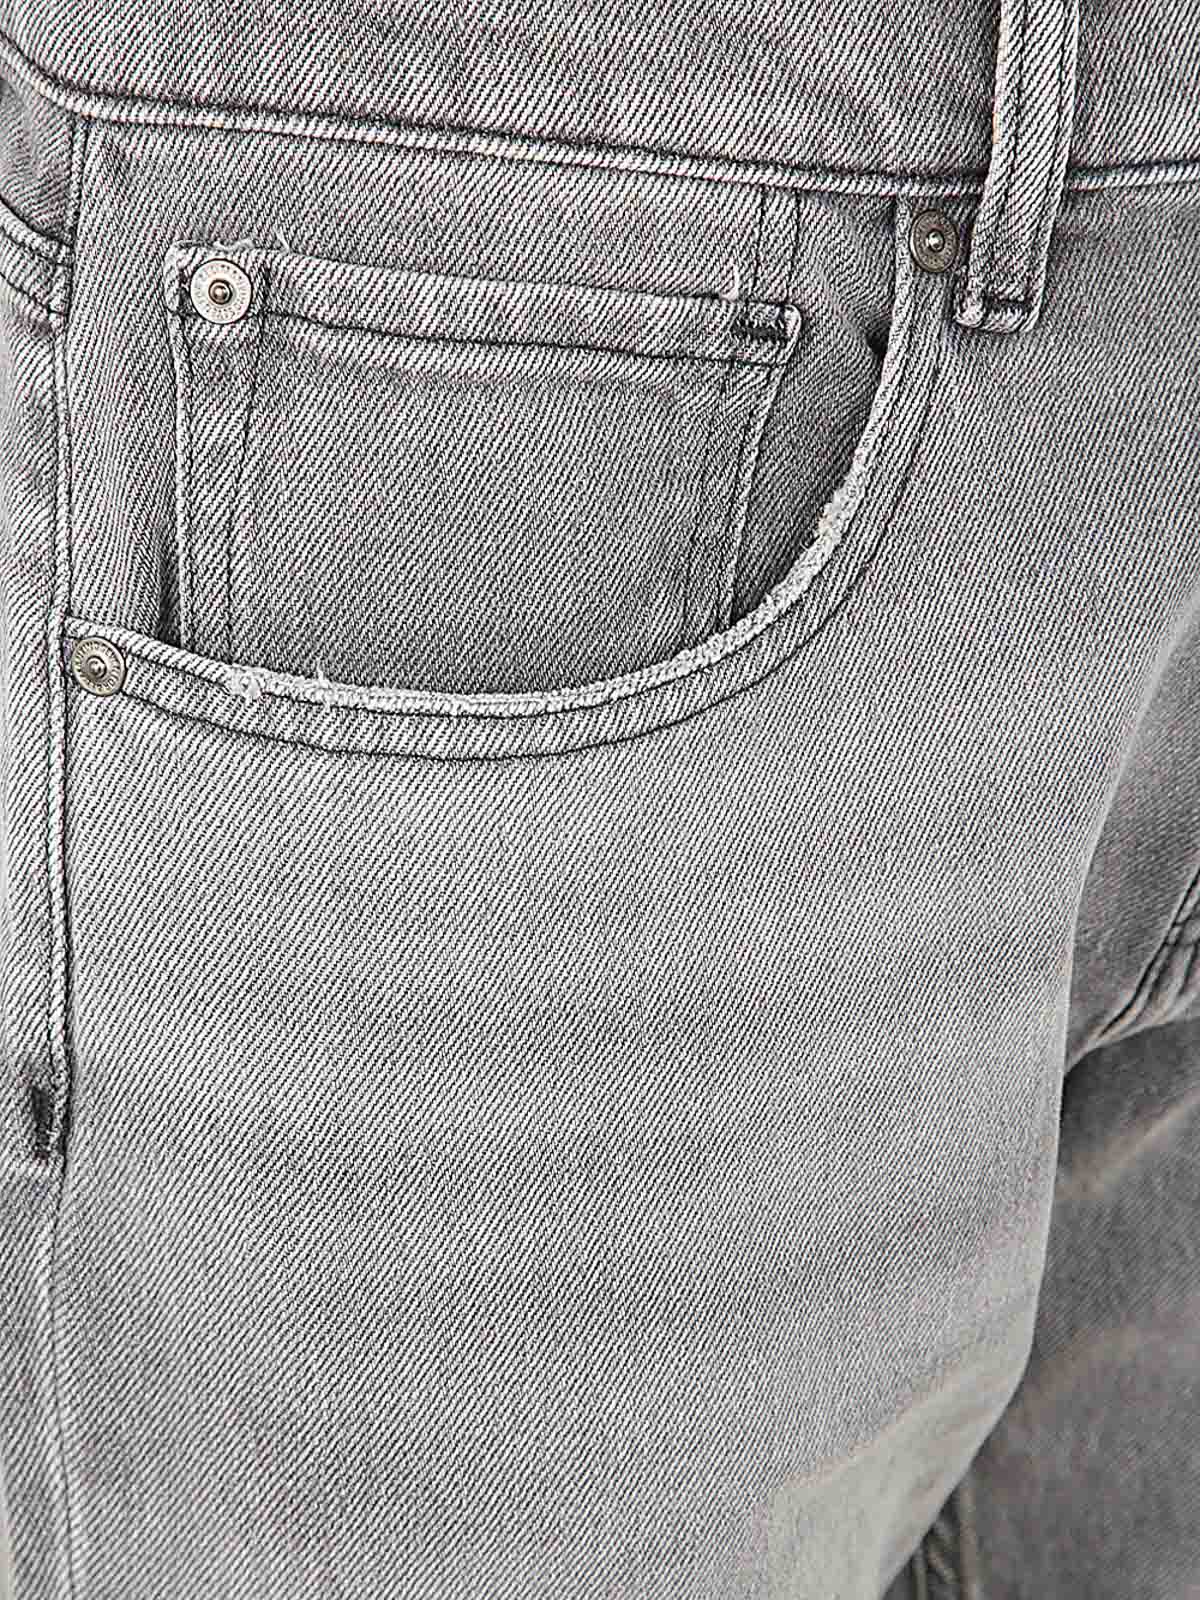 Shop 7 For All Mankind The Straight Growth Jeans In Grey